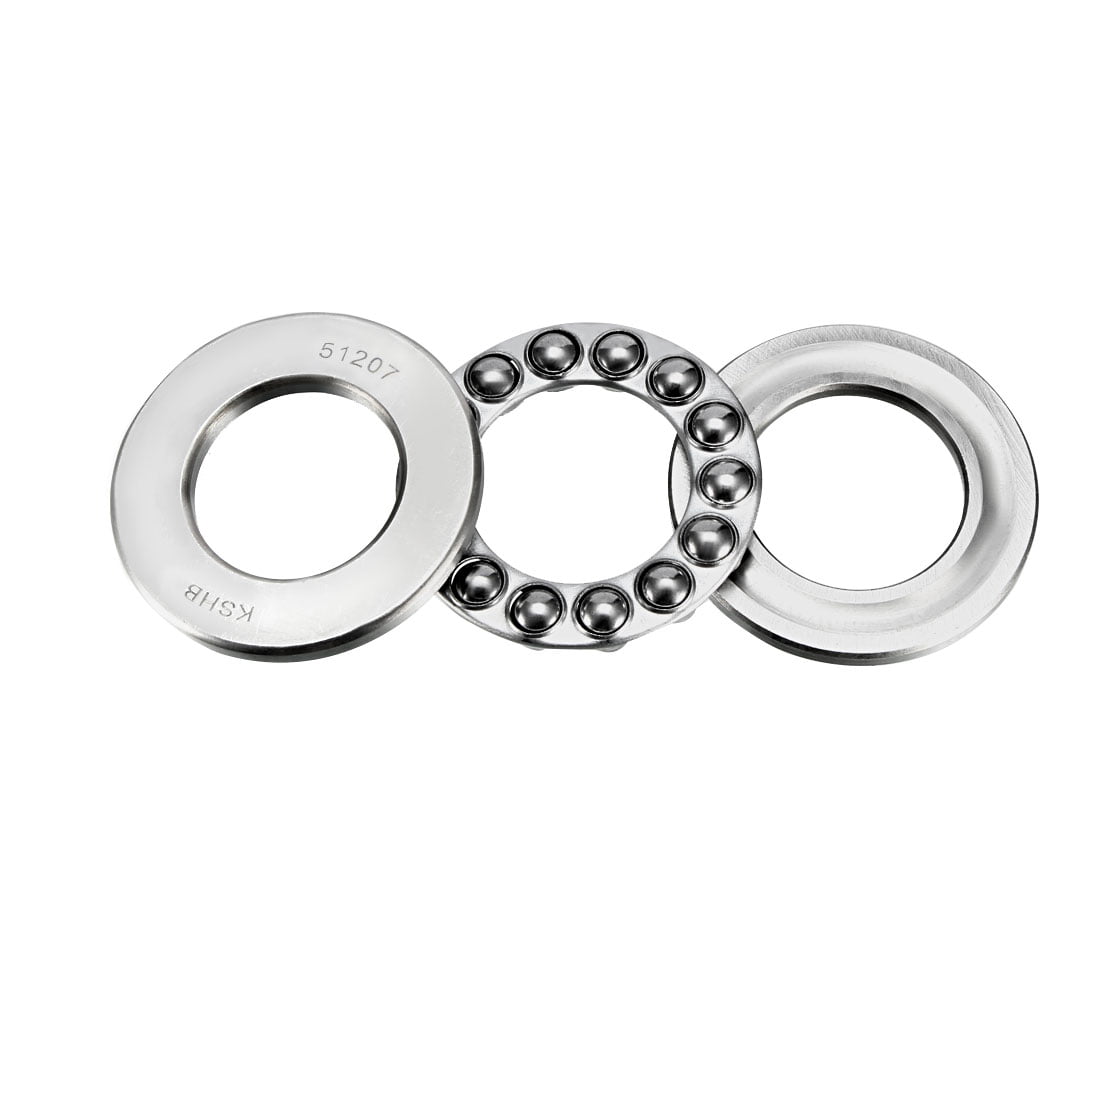 uxcell 51207 Thrust Ball Bearings 35mm x 62mm x 18mm Carbon Steel One-Way Rolling Direction